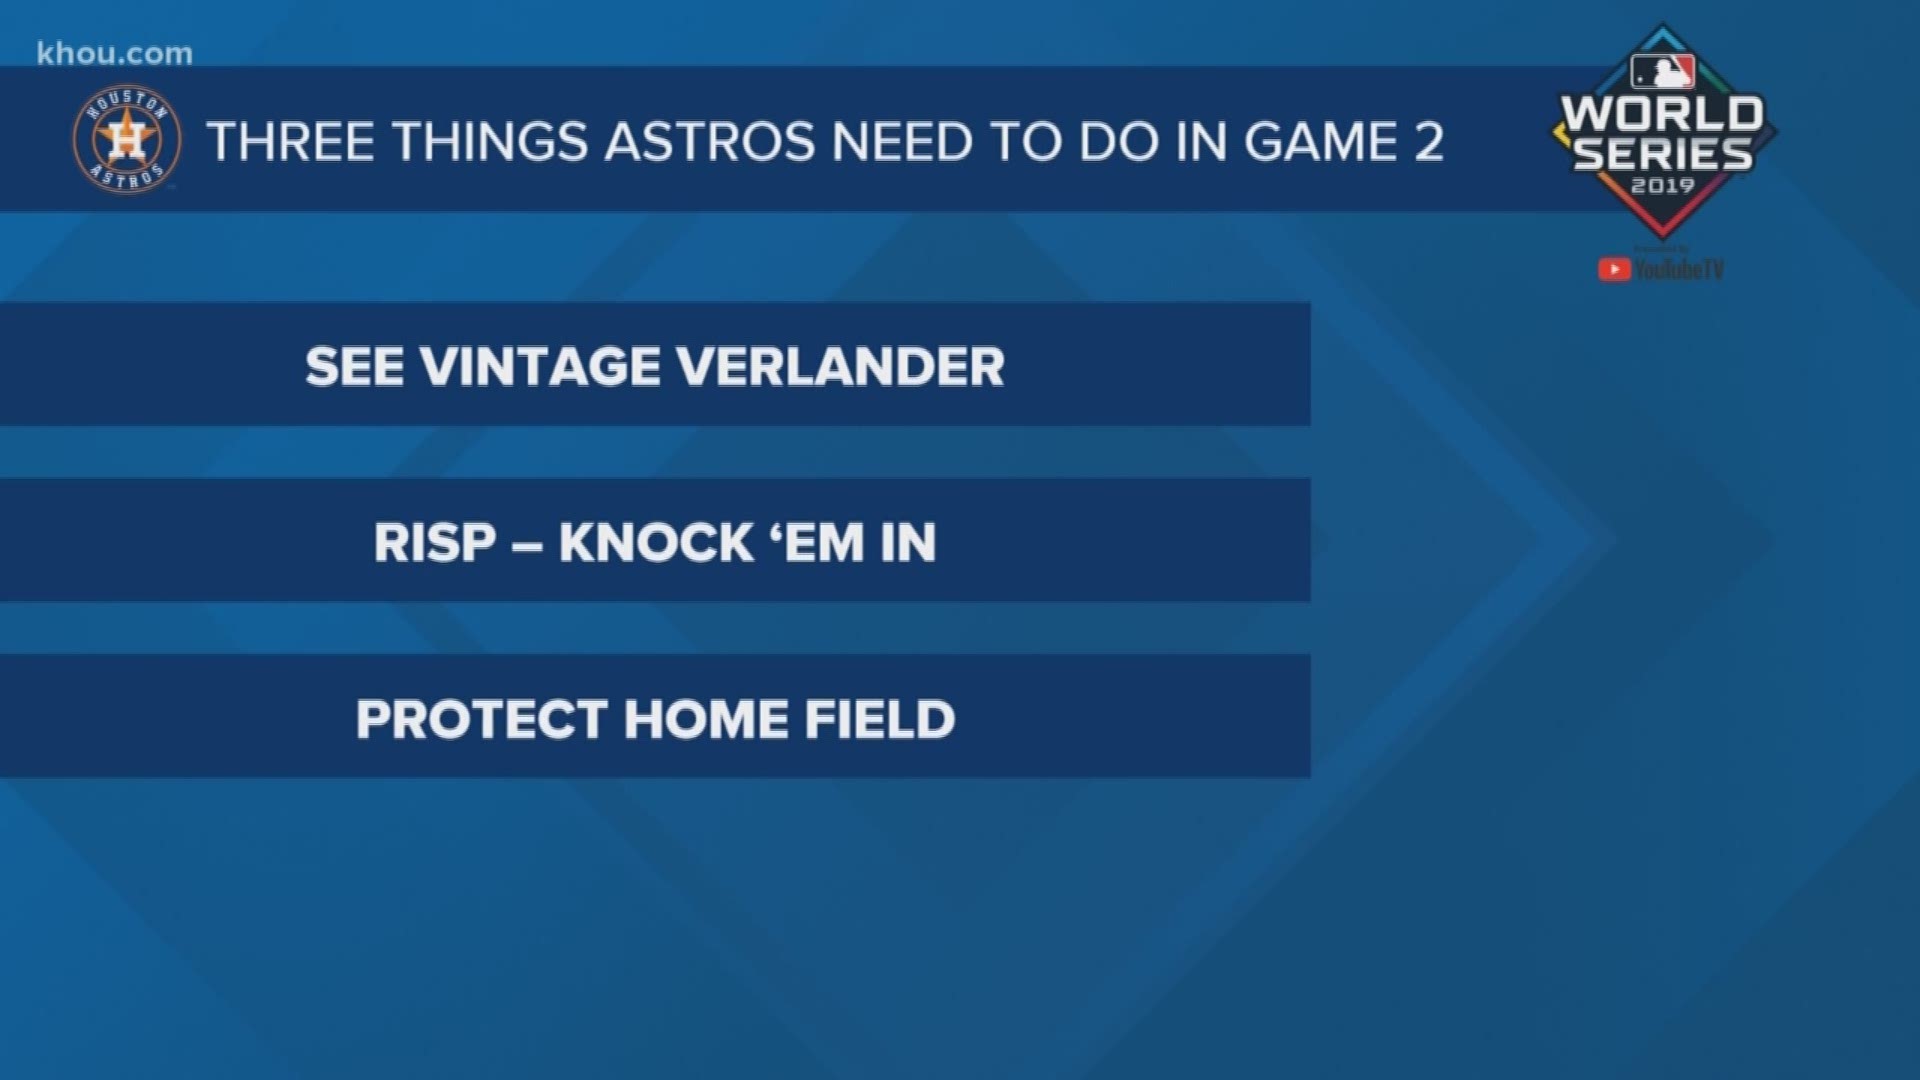 KHOU 11 Sports Anchor Jason Bristol and KHOU 11 Baseball Analyst Jeremy Booth discuss the things the Astros need to do to take Game 2.